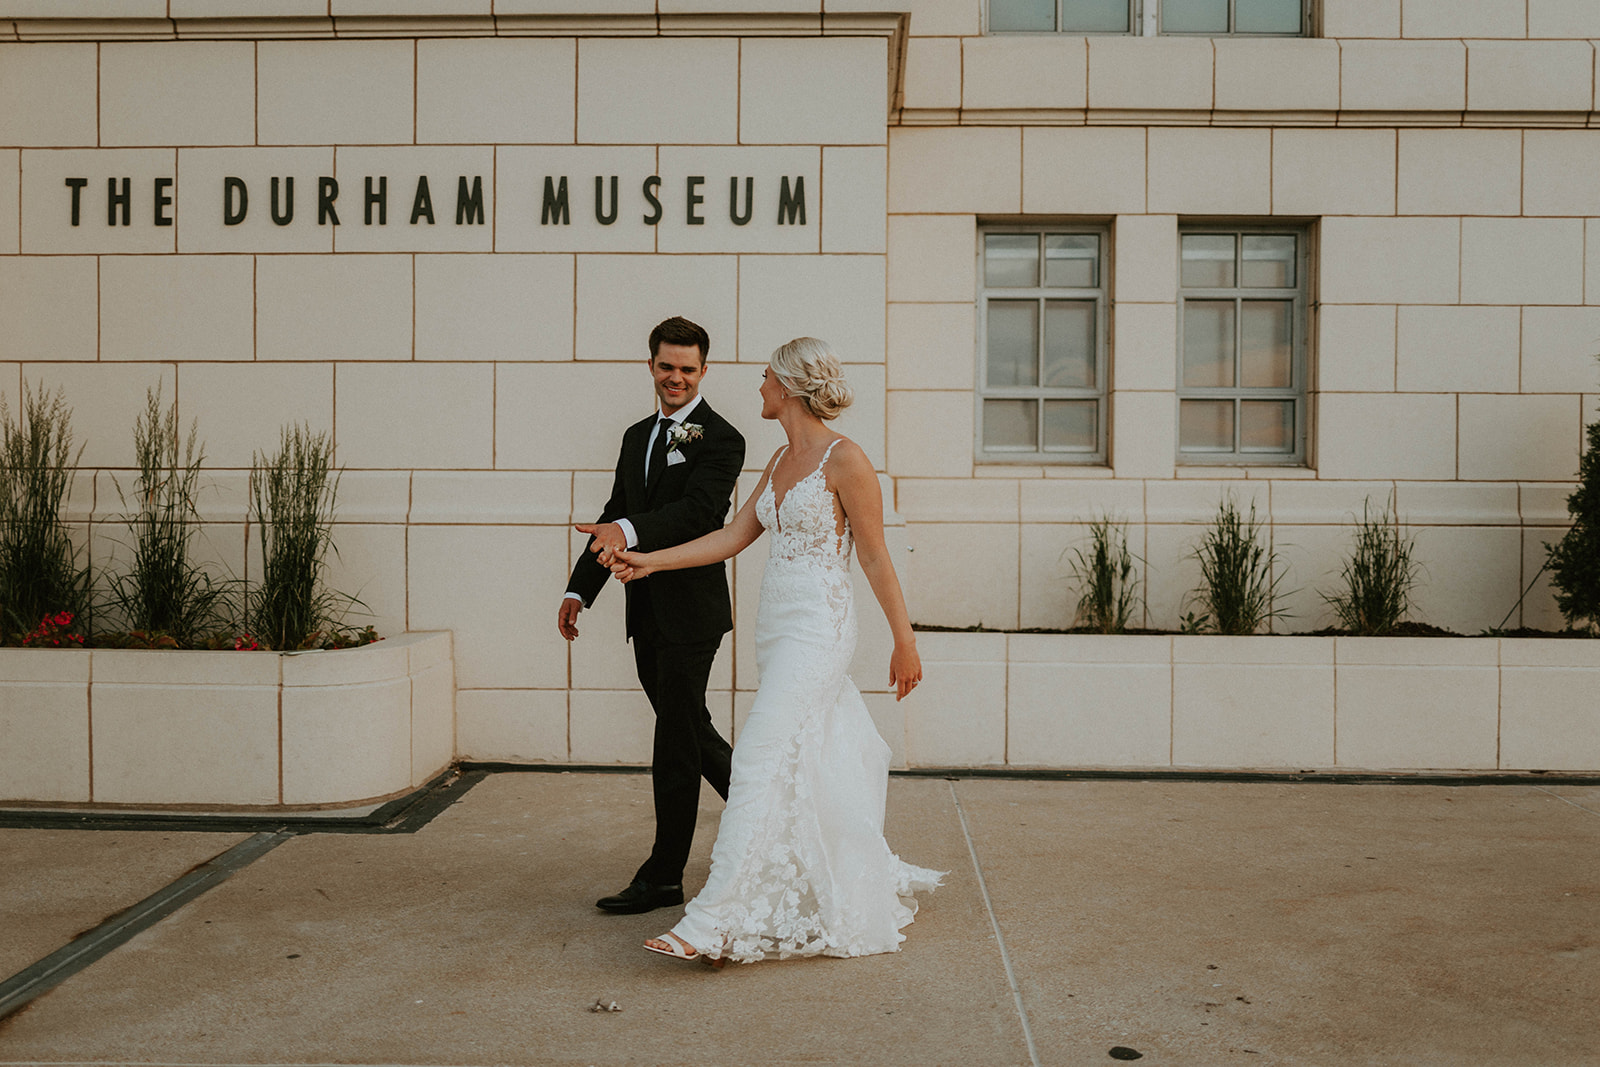 Bride and groom smiling at each other while holding hands and walking past the The Durham Museum sign in Omaha, Nebraska